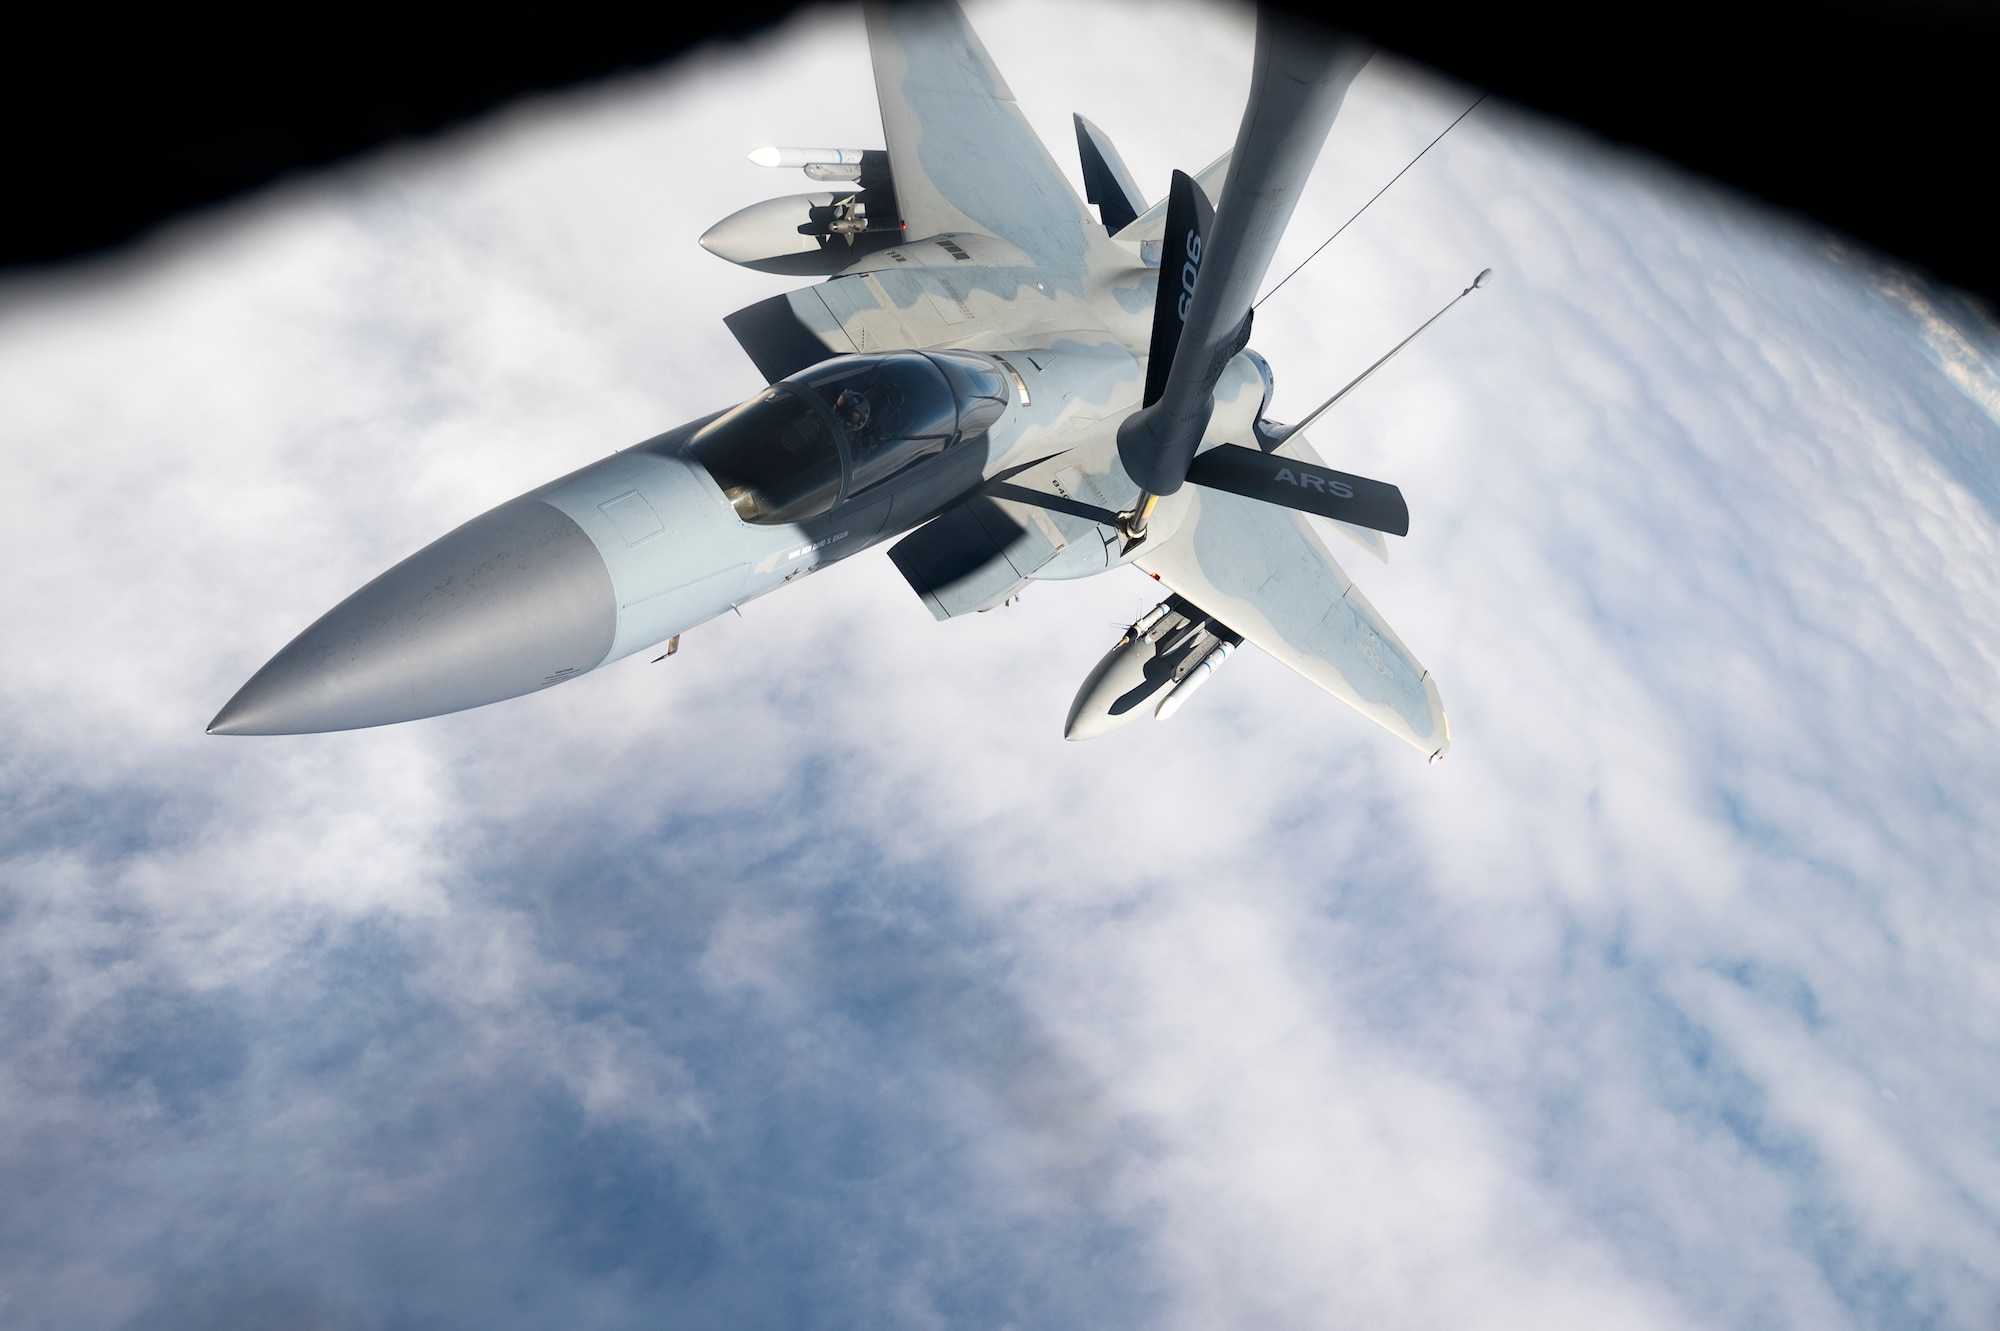 A 44th Fighter Squadron F-15C Eagle receives fuel from a 909th Air Refueling Squadron KC-135 Stratotanker during a flight over the Pacific Ocean in support of exercise Keen Sword 23, Nov. 17, 2022. Bilateral exercises demonstrate the U.S. and Japan’s strong, shared commitment to a free and open Indo-Pacific. (U.S. Air Force photo by Senior Airman Jessi Roth)